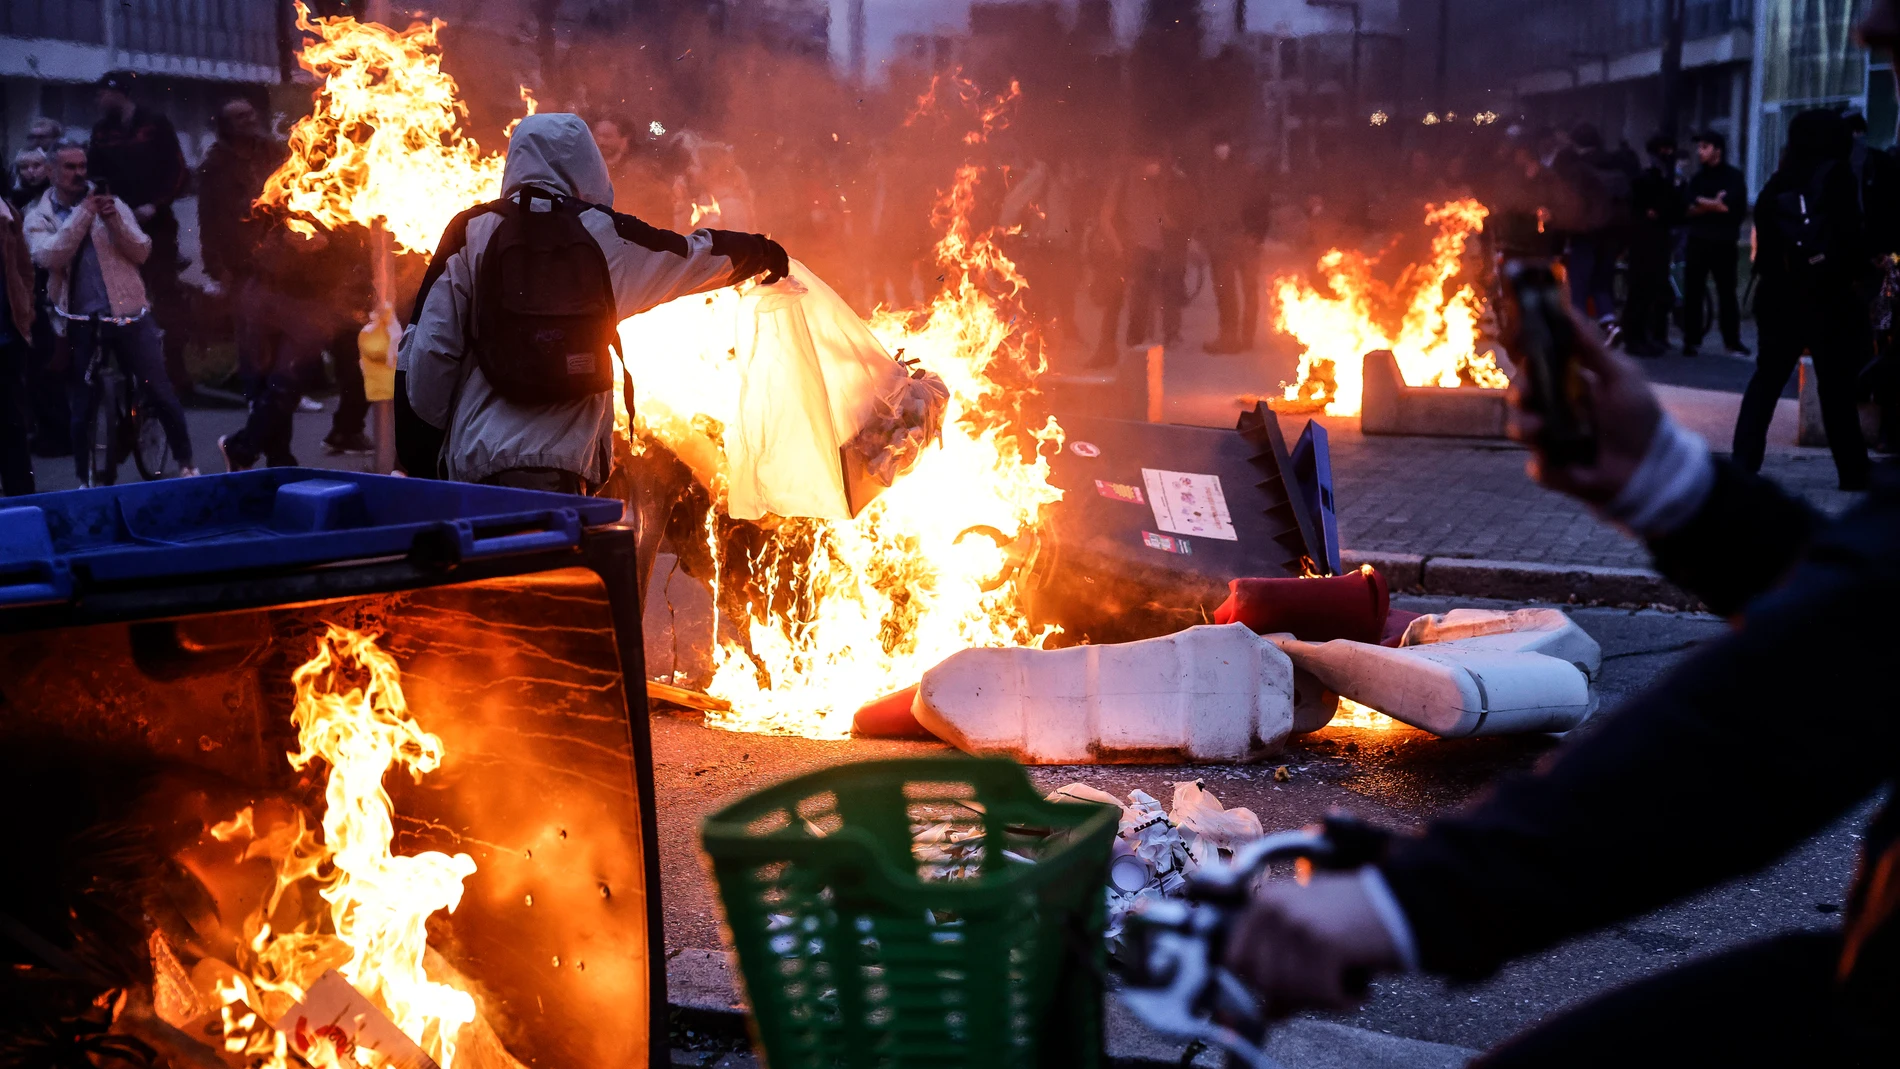 Protesters burn dustbins at the end of a demonstration in Strasbourg, France, Thursday, March 23, 2023. French unions are holding their first mass demonstrations Thursday since President Emmanuel Macron enflamed public anger by forcing a higher retirement age through parliament without a vote. (AP Photo/Jean-Francois Badias)